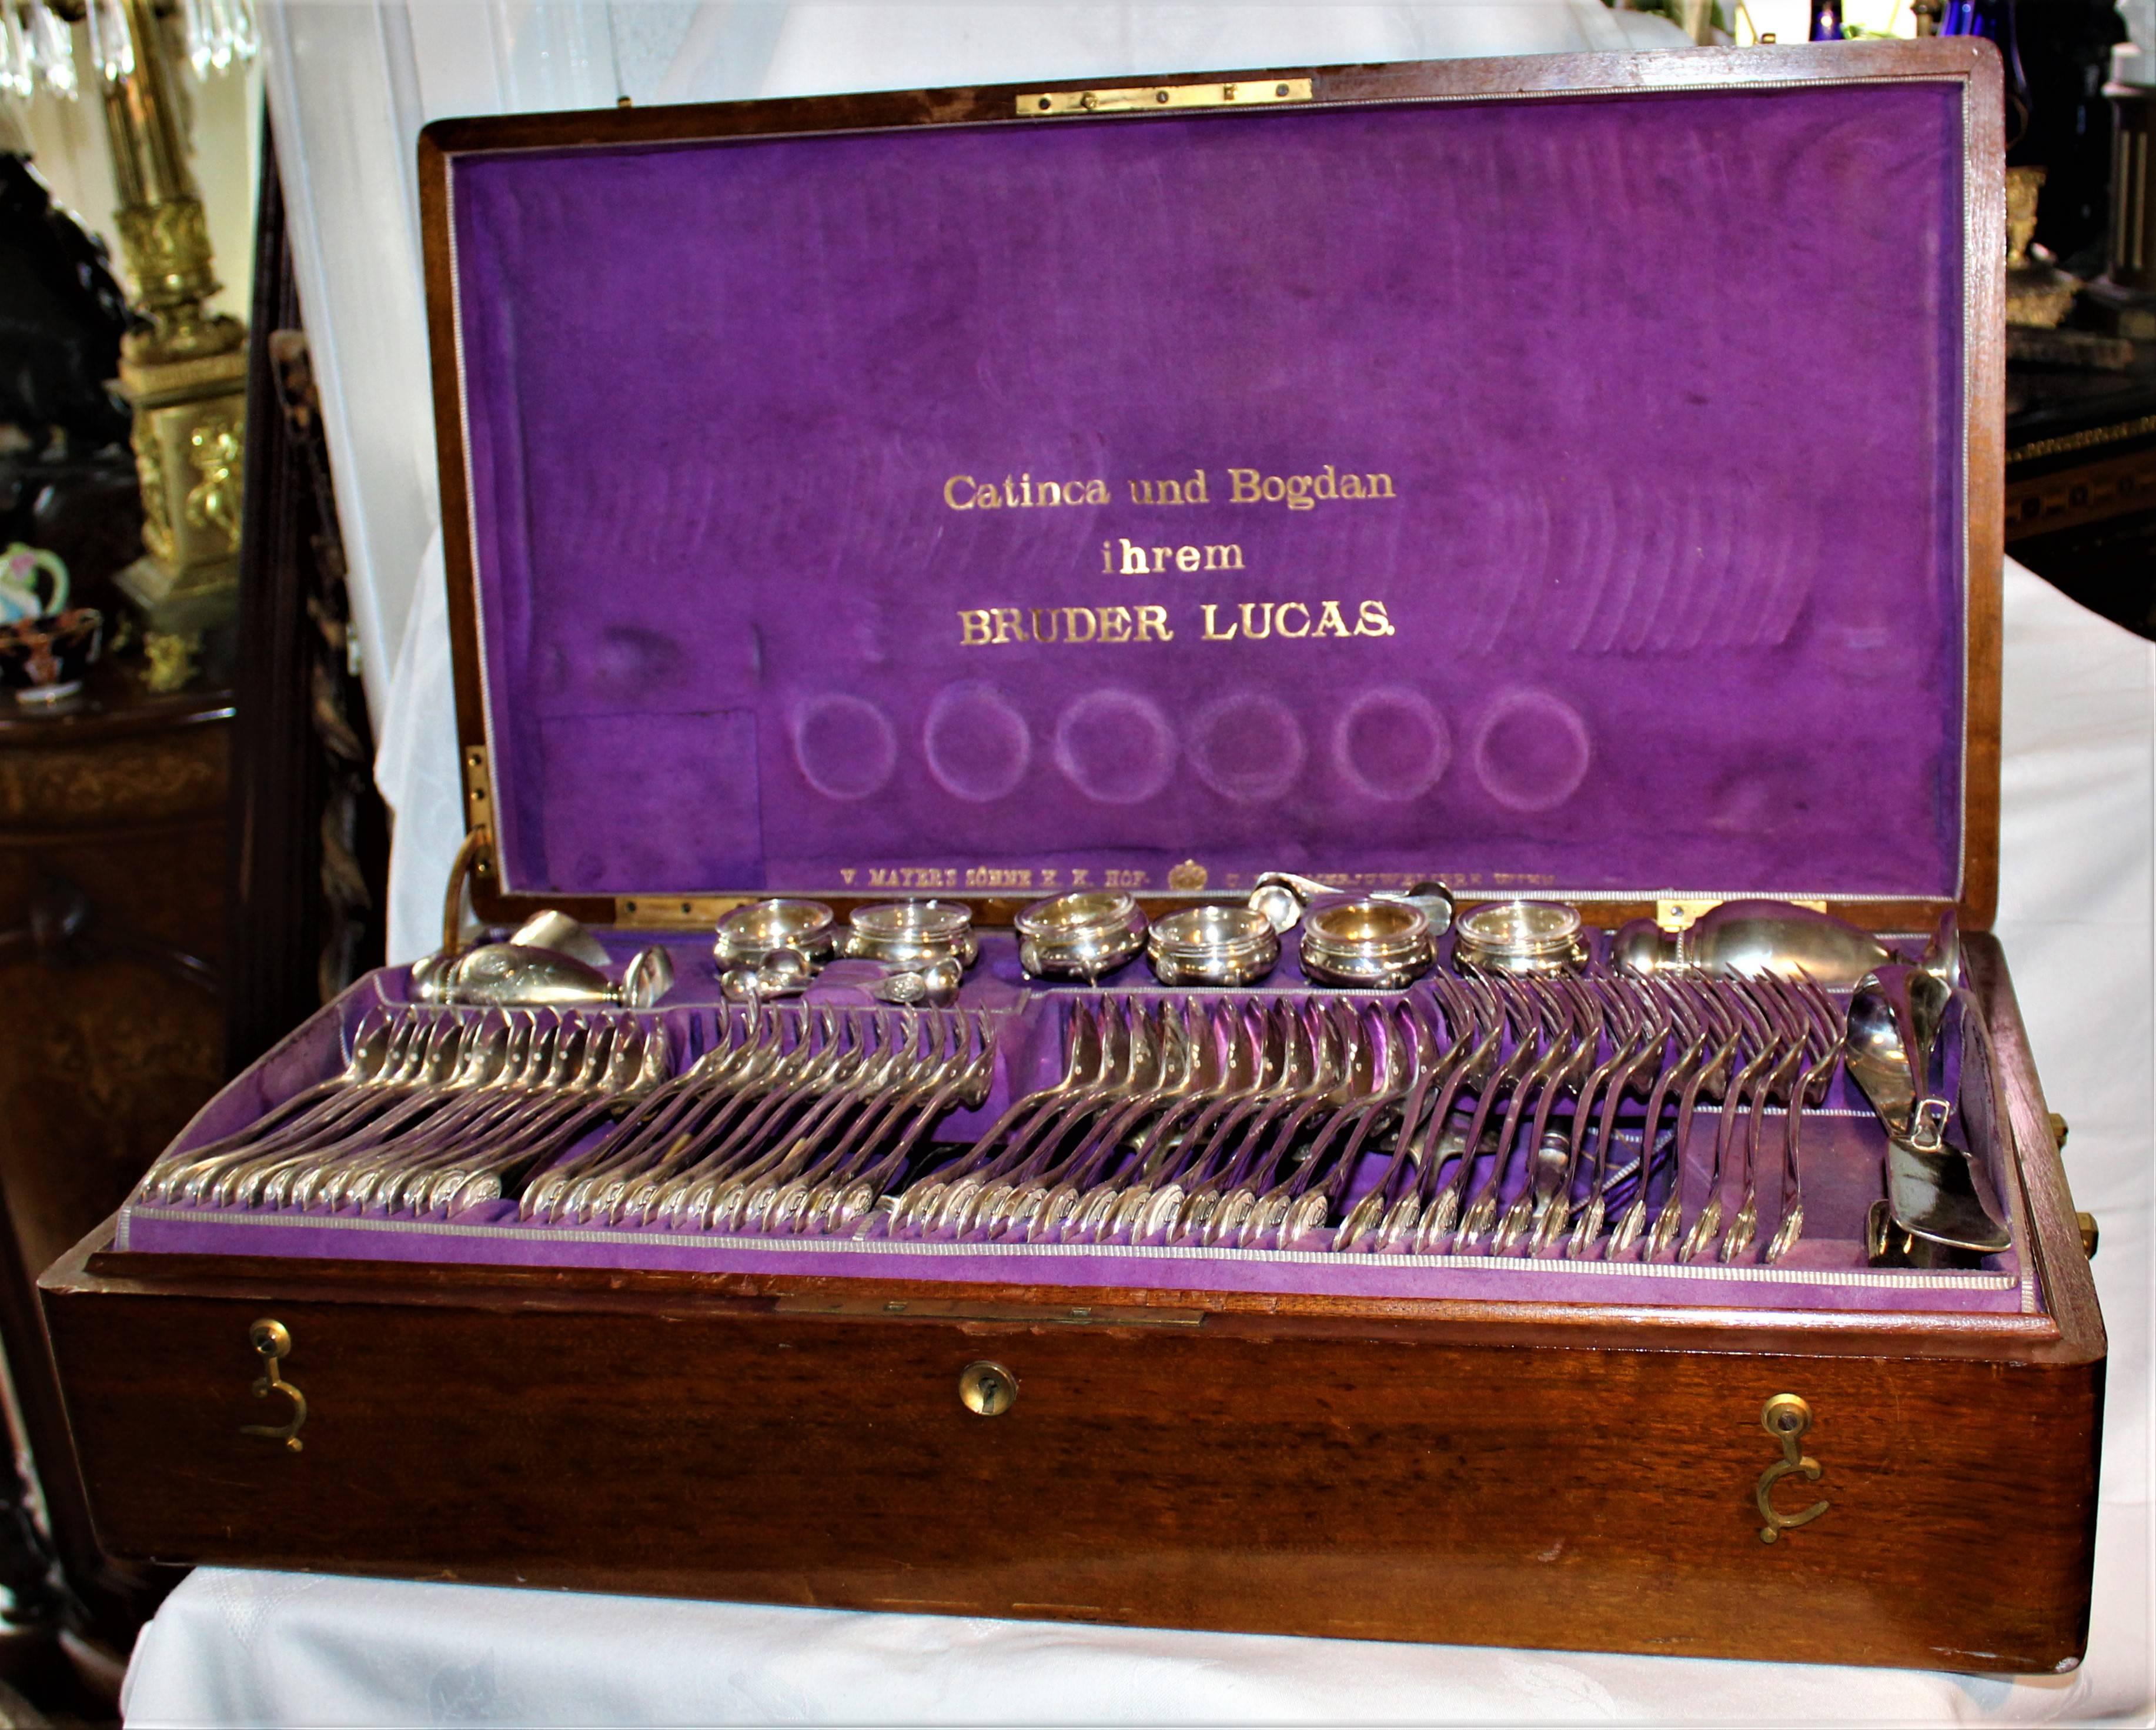 Created by Vincenz Mayer's and Sohnes (SMS) purveyors to the Imperial Court, Austro Hungarian Empire. Pre First World War and the dissolution of the Austro Hungarian Empire. European 800 silverware 151 pieces in its original presentation case box.